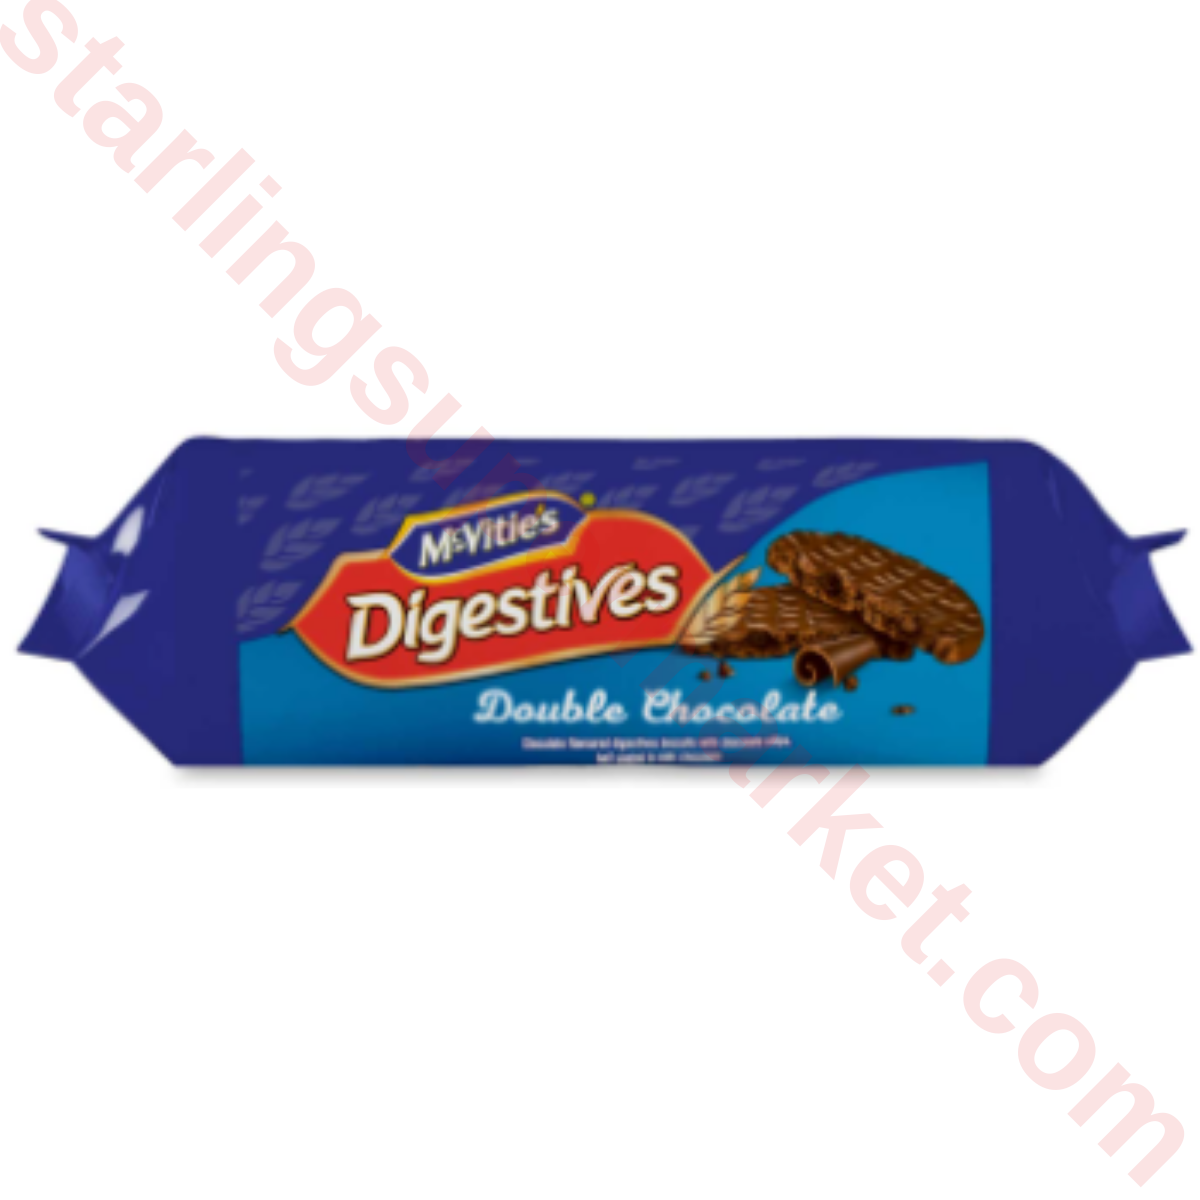 MCVITIES BISKUVI DIGESTIVES DOUBLE CHOCOLATE 250 G